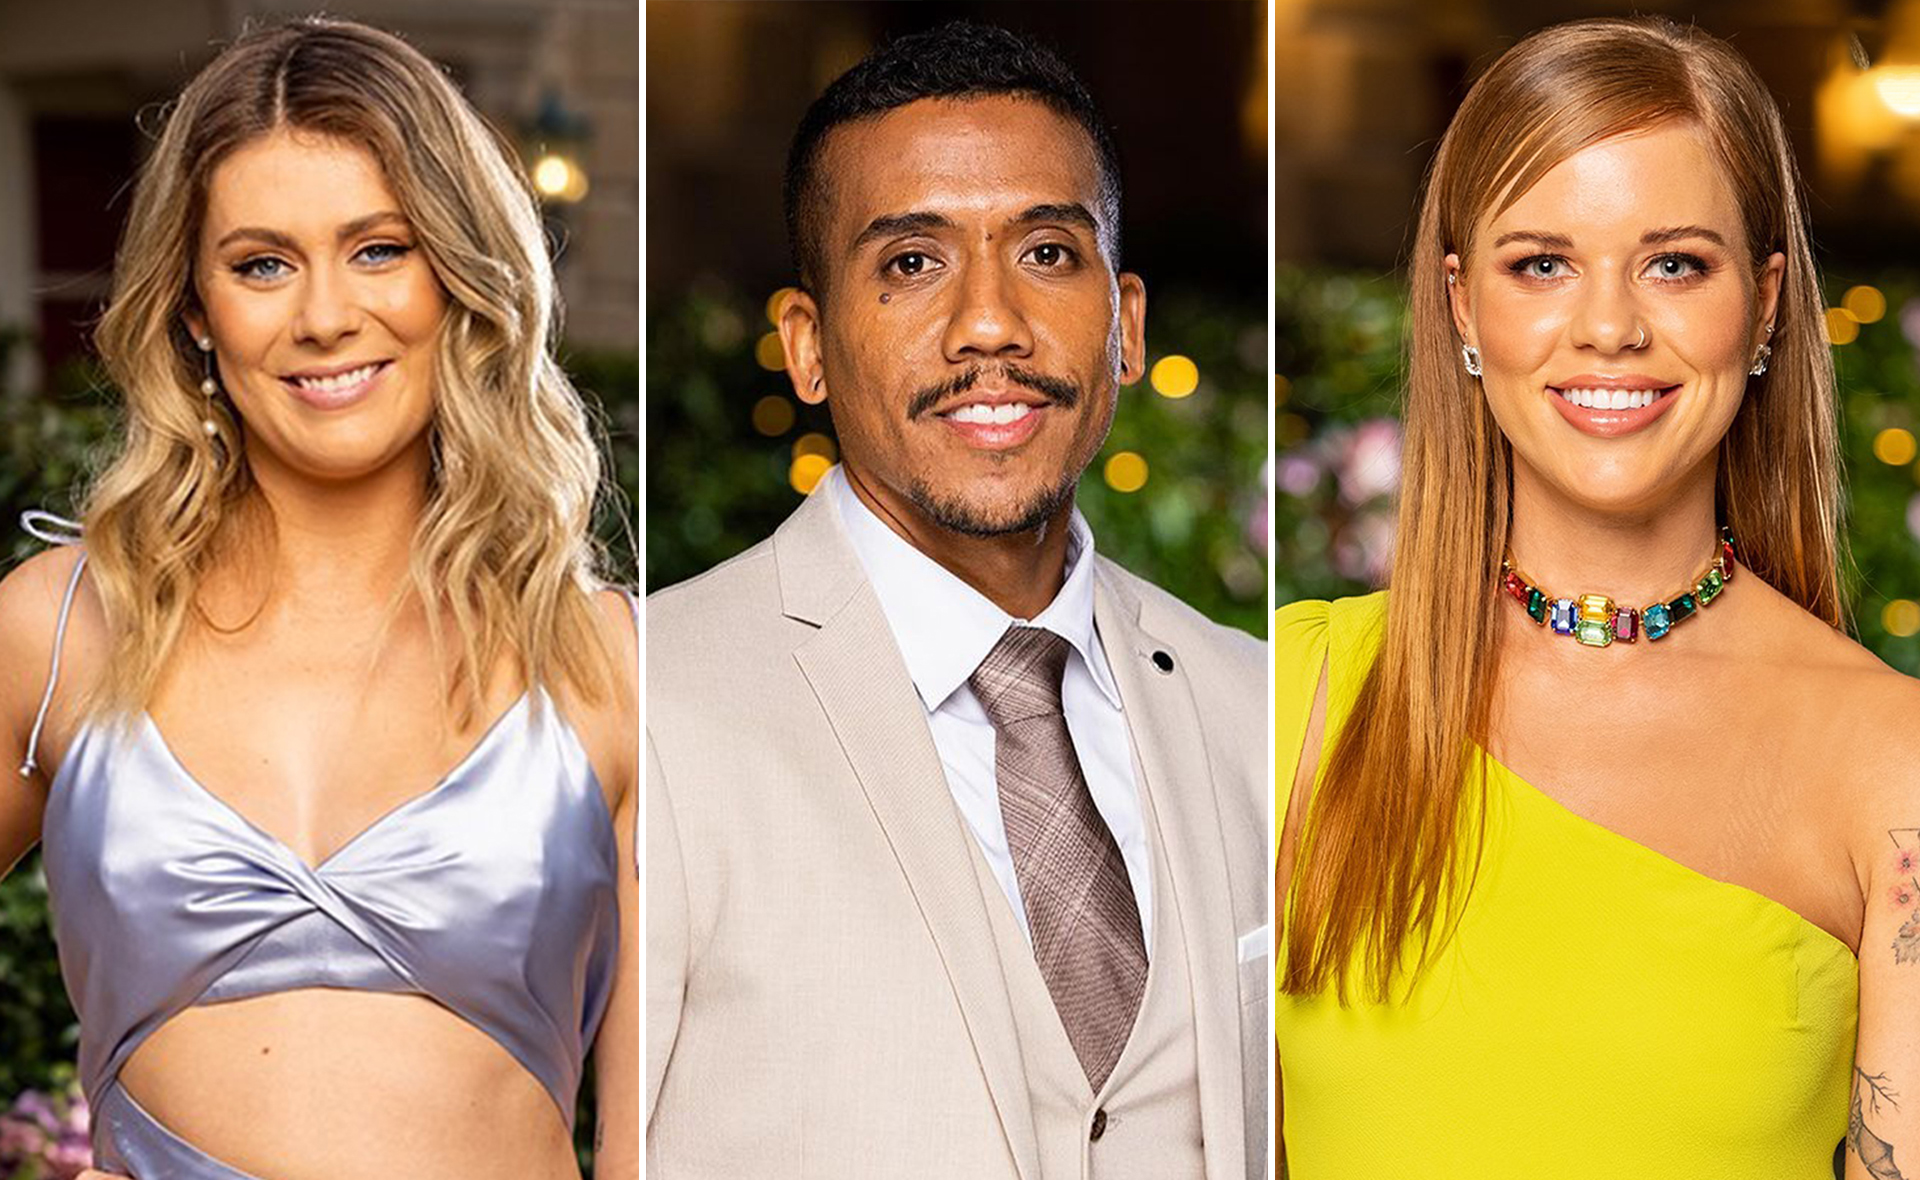 It’s a wrap! See who was sent home and became the runner up in the Bachelorette finale